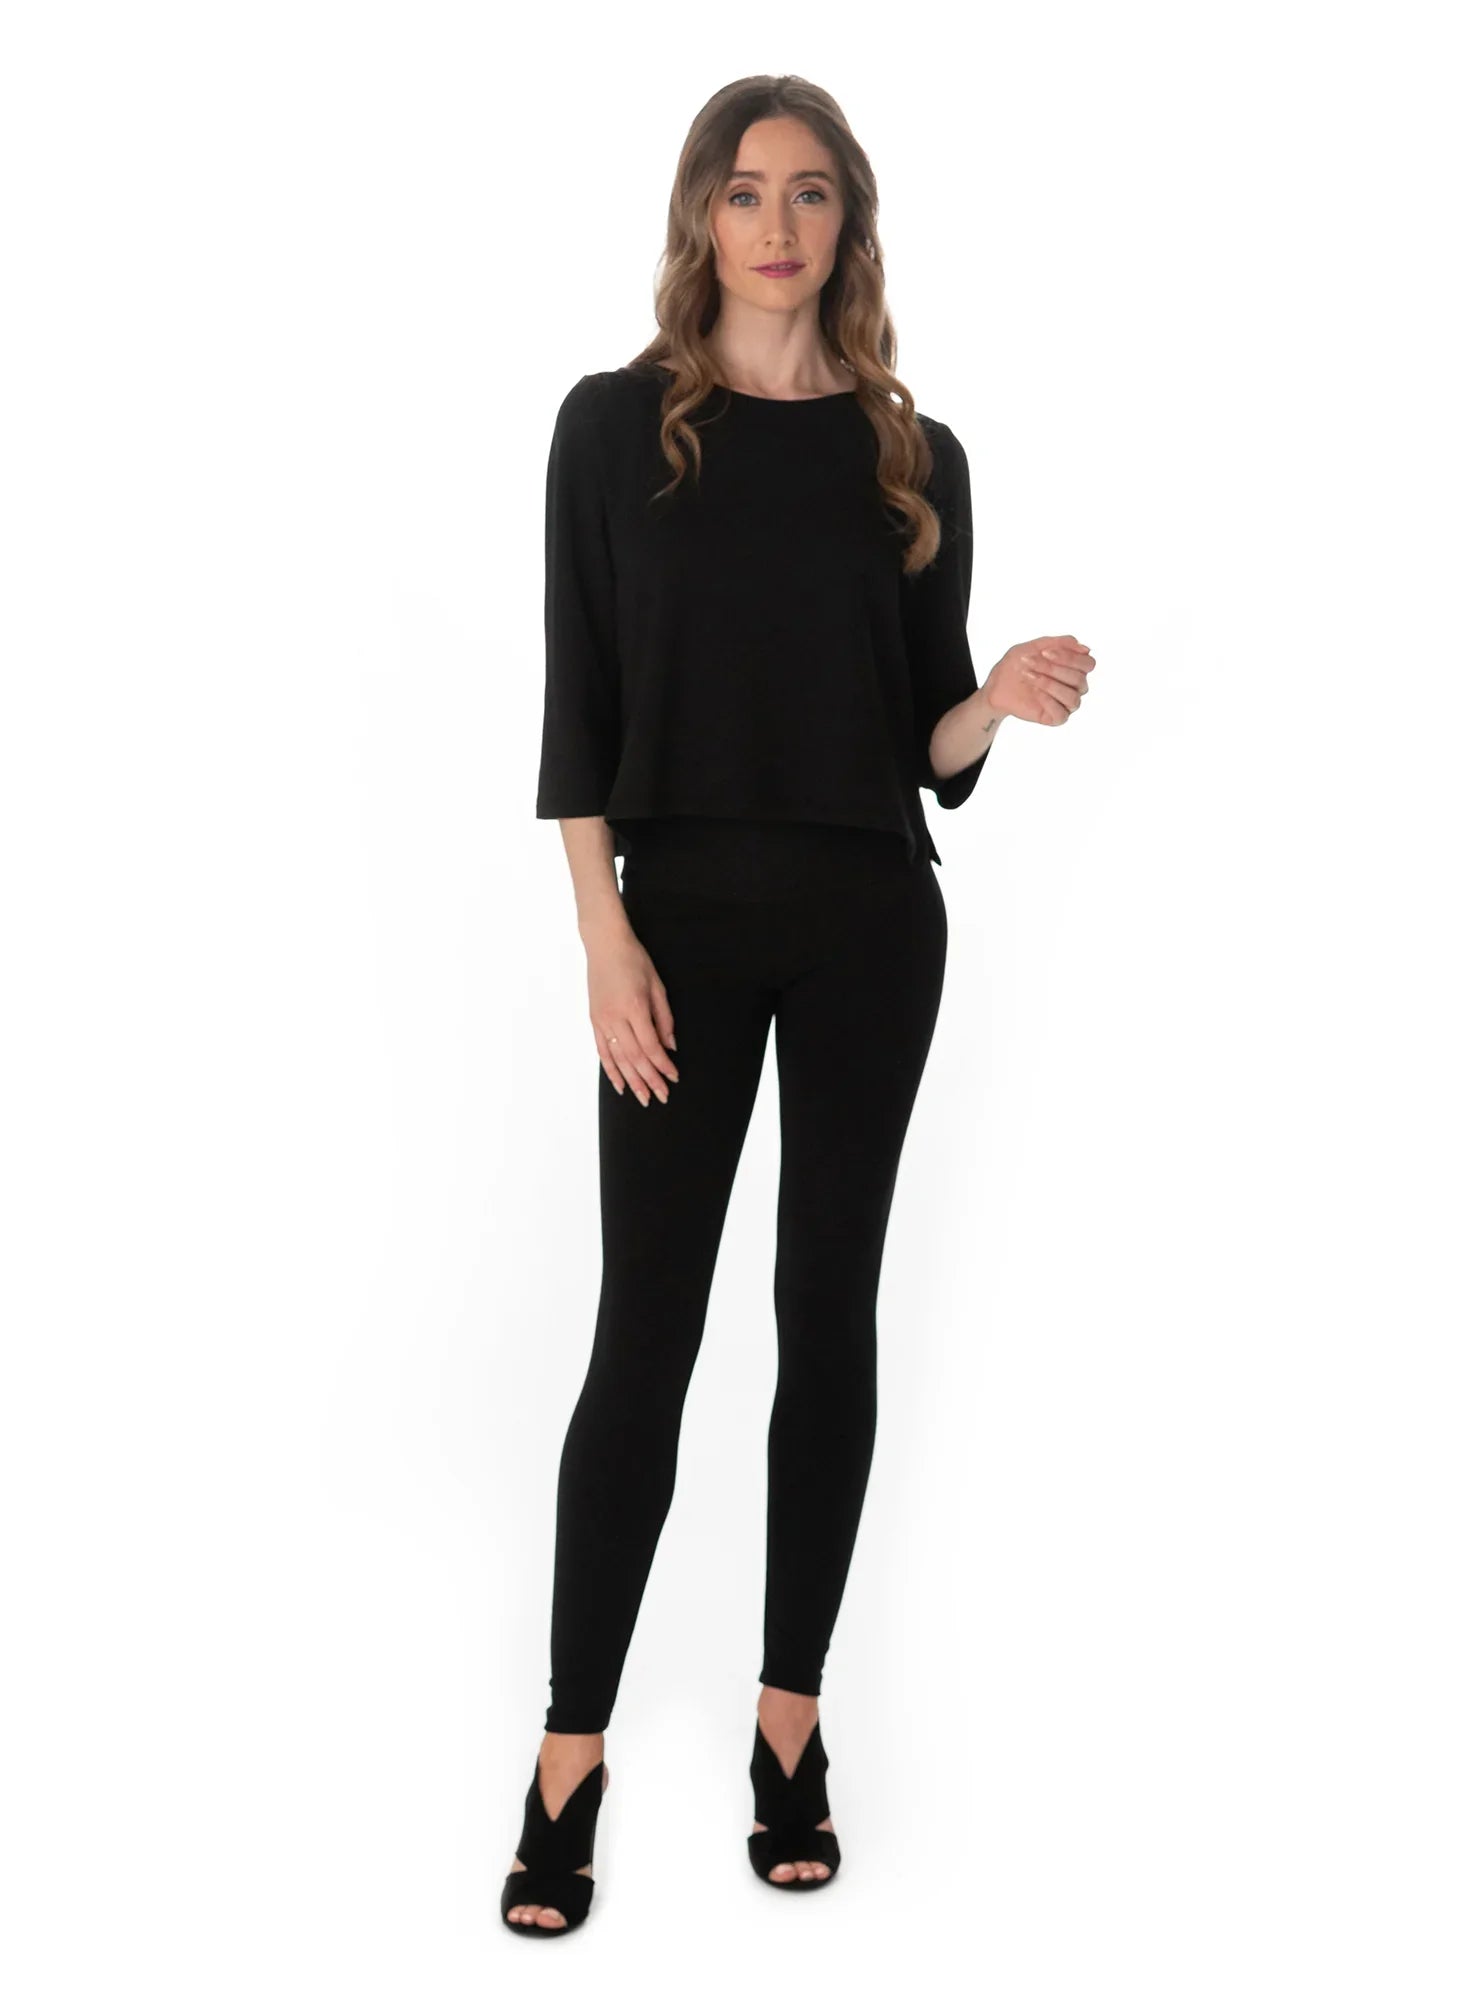 Smoothing Leggings Made in Canada by Duffield Design, Lux Eco Clothing